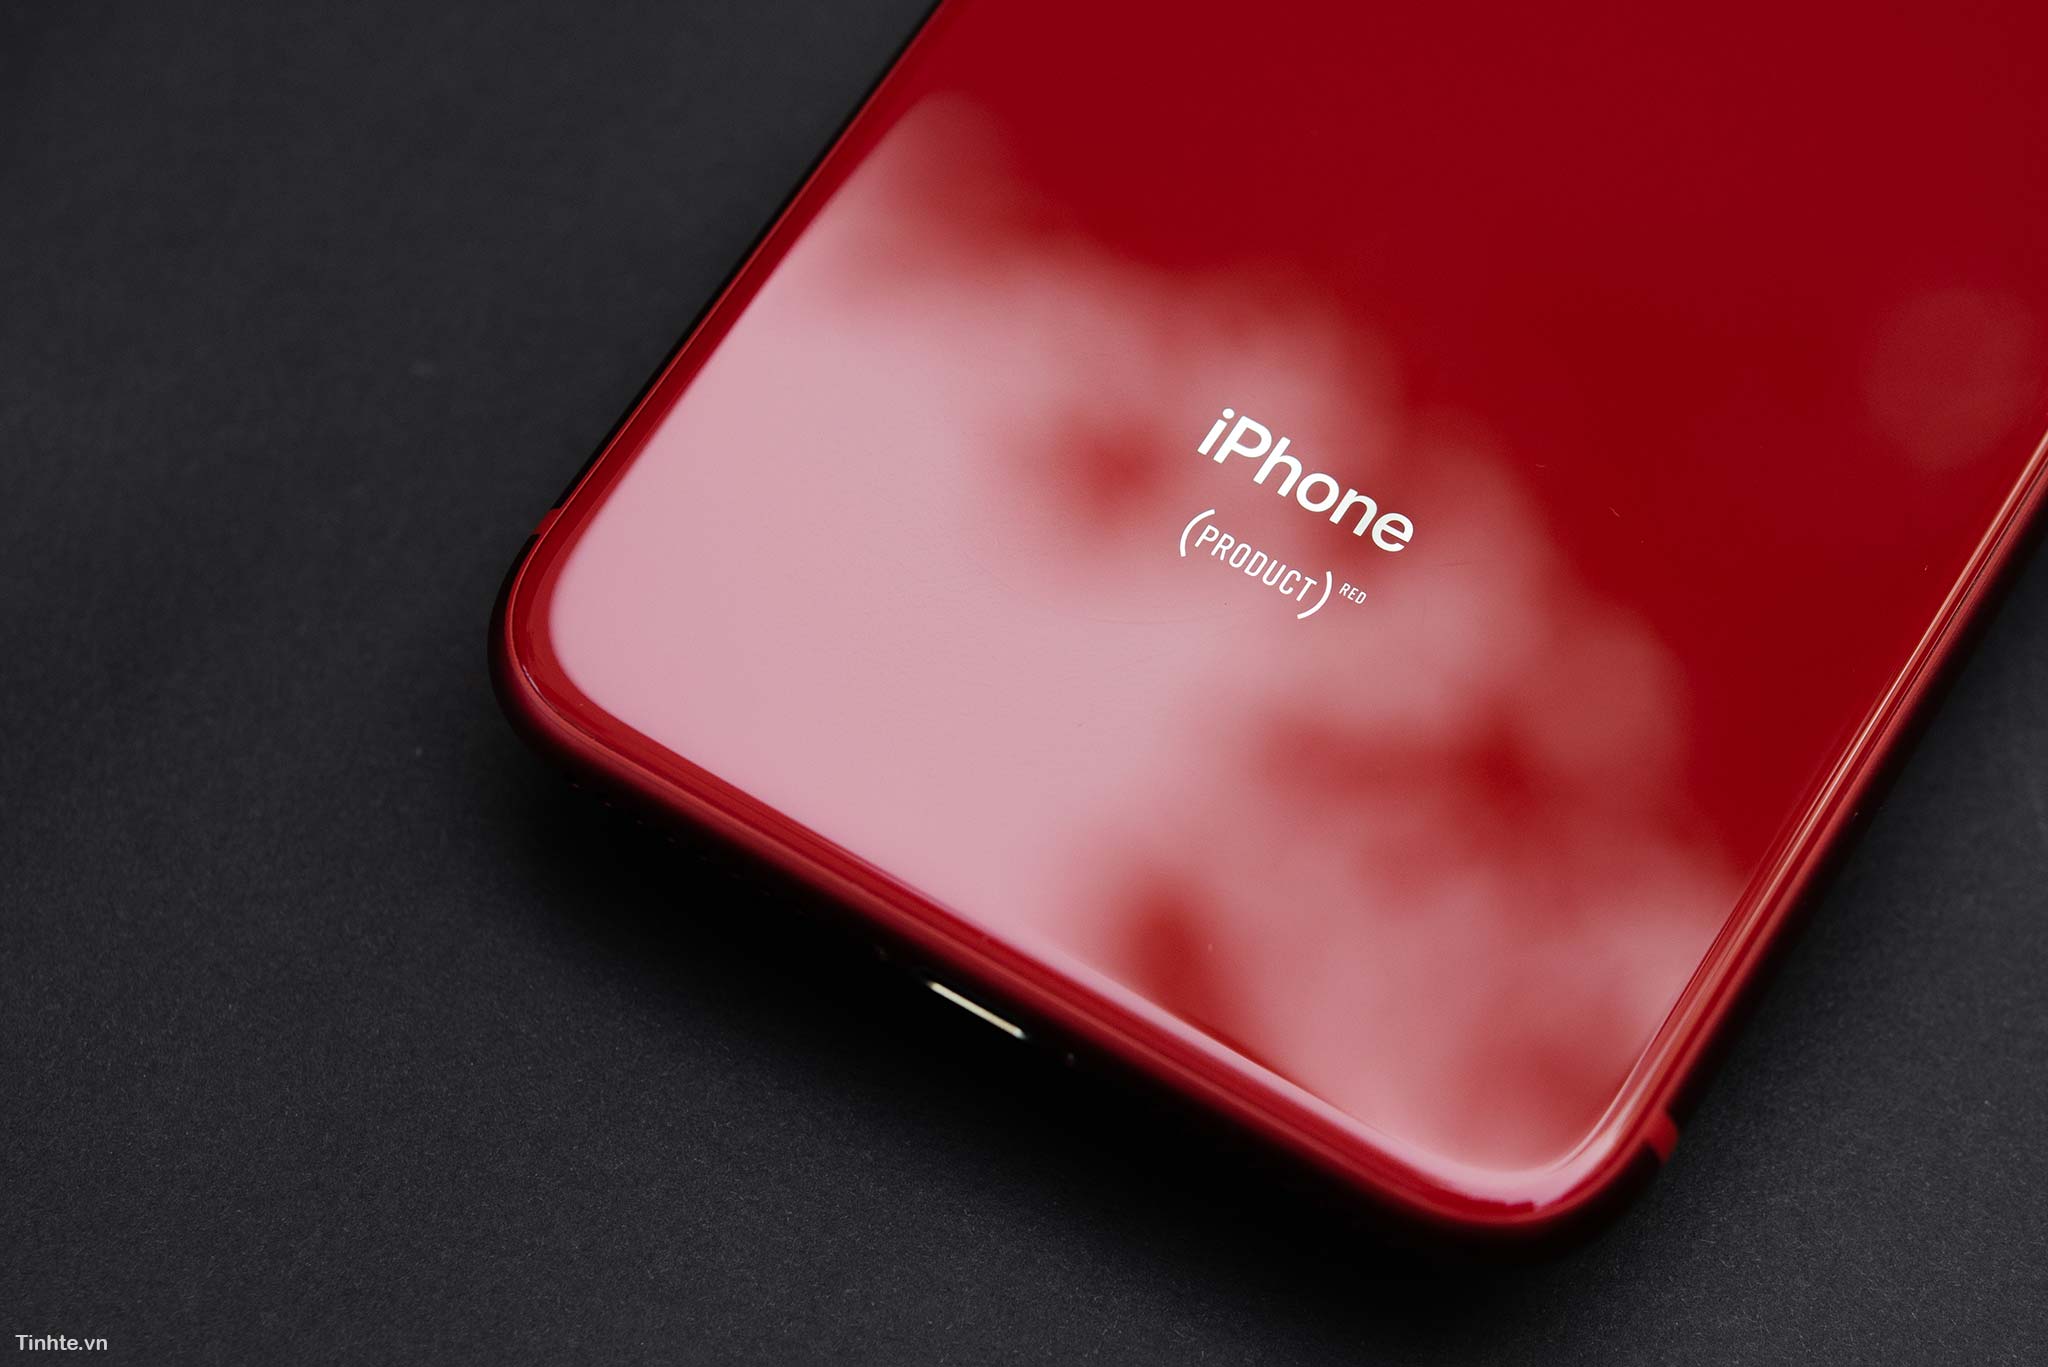 tinhte_tren_tay_apple_iphone_8_product_red_10.jpg